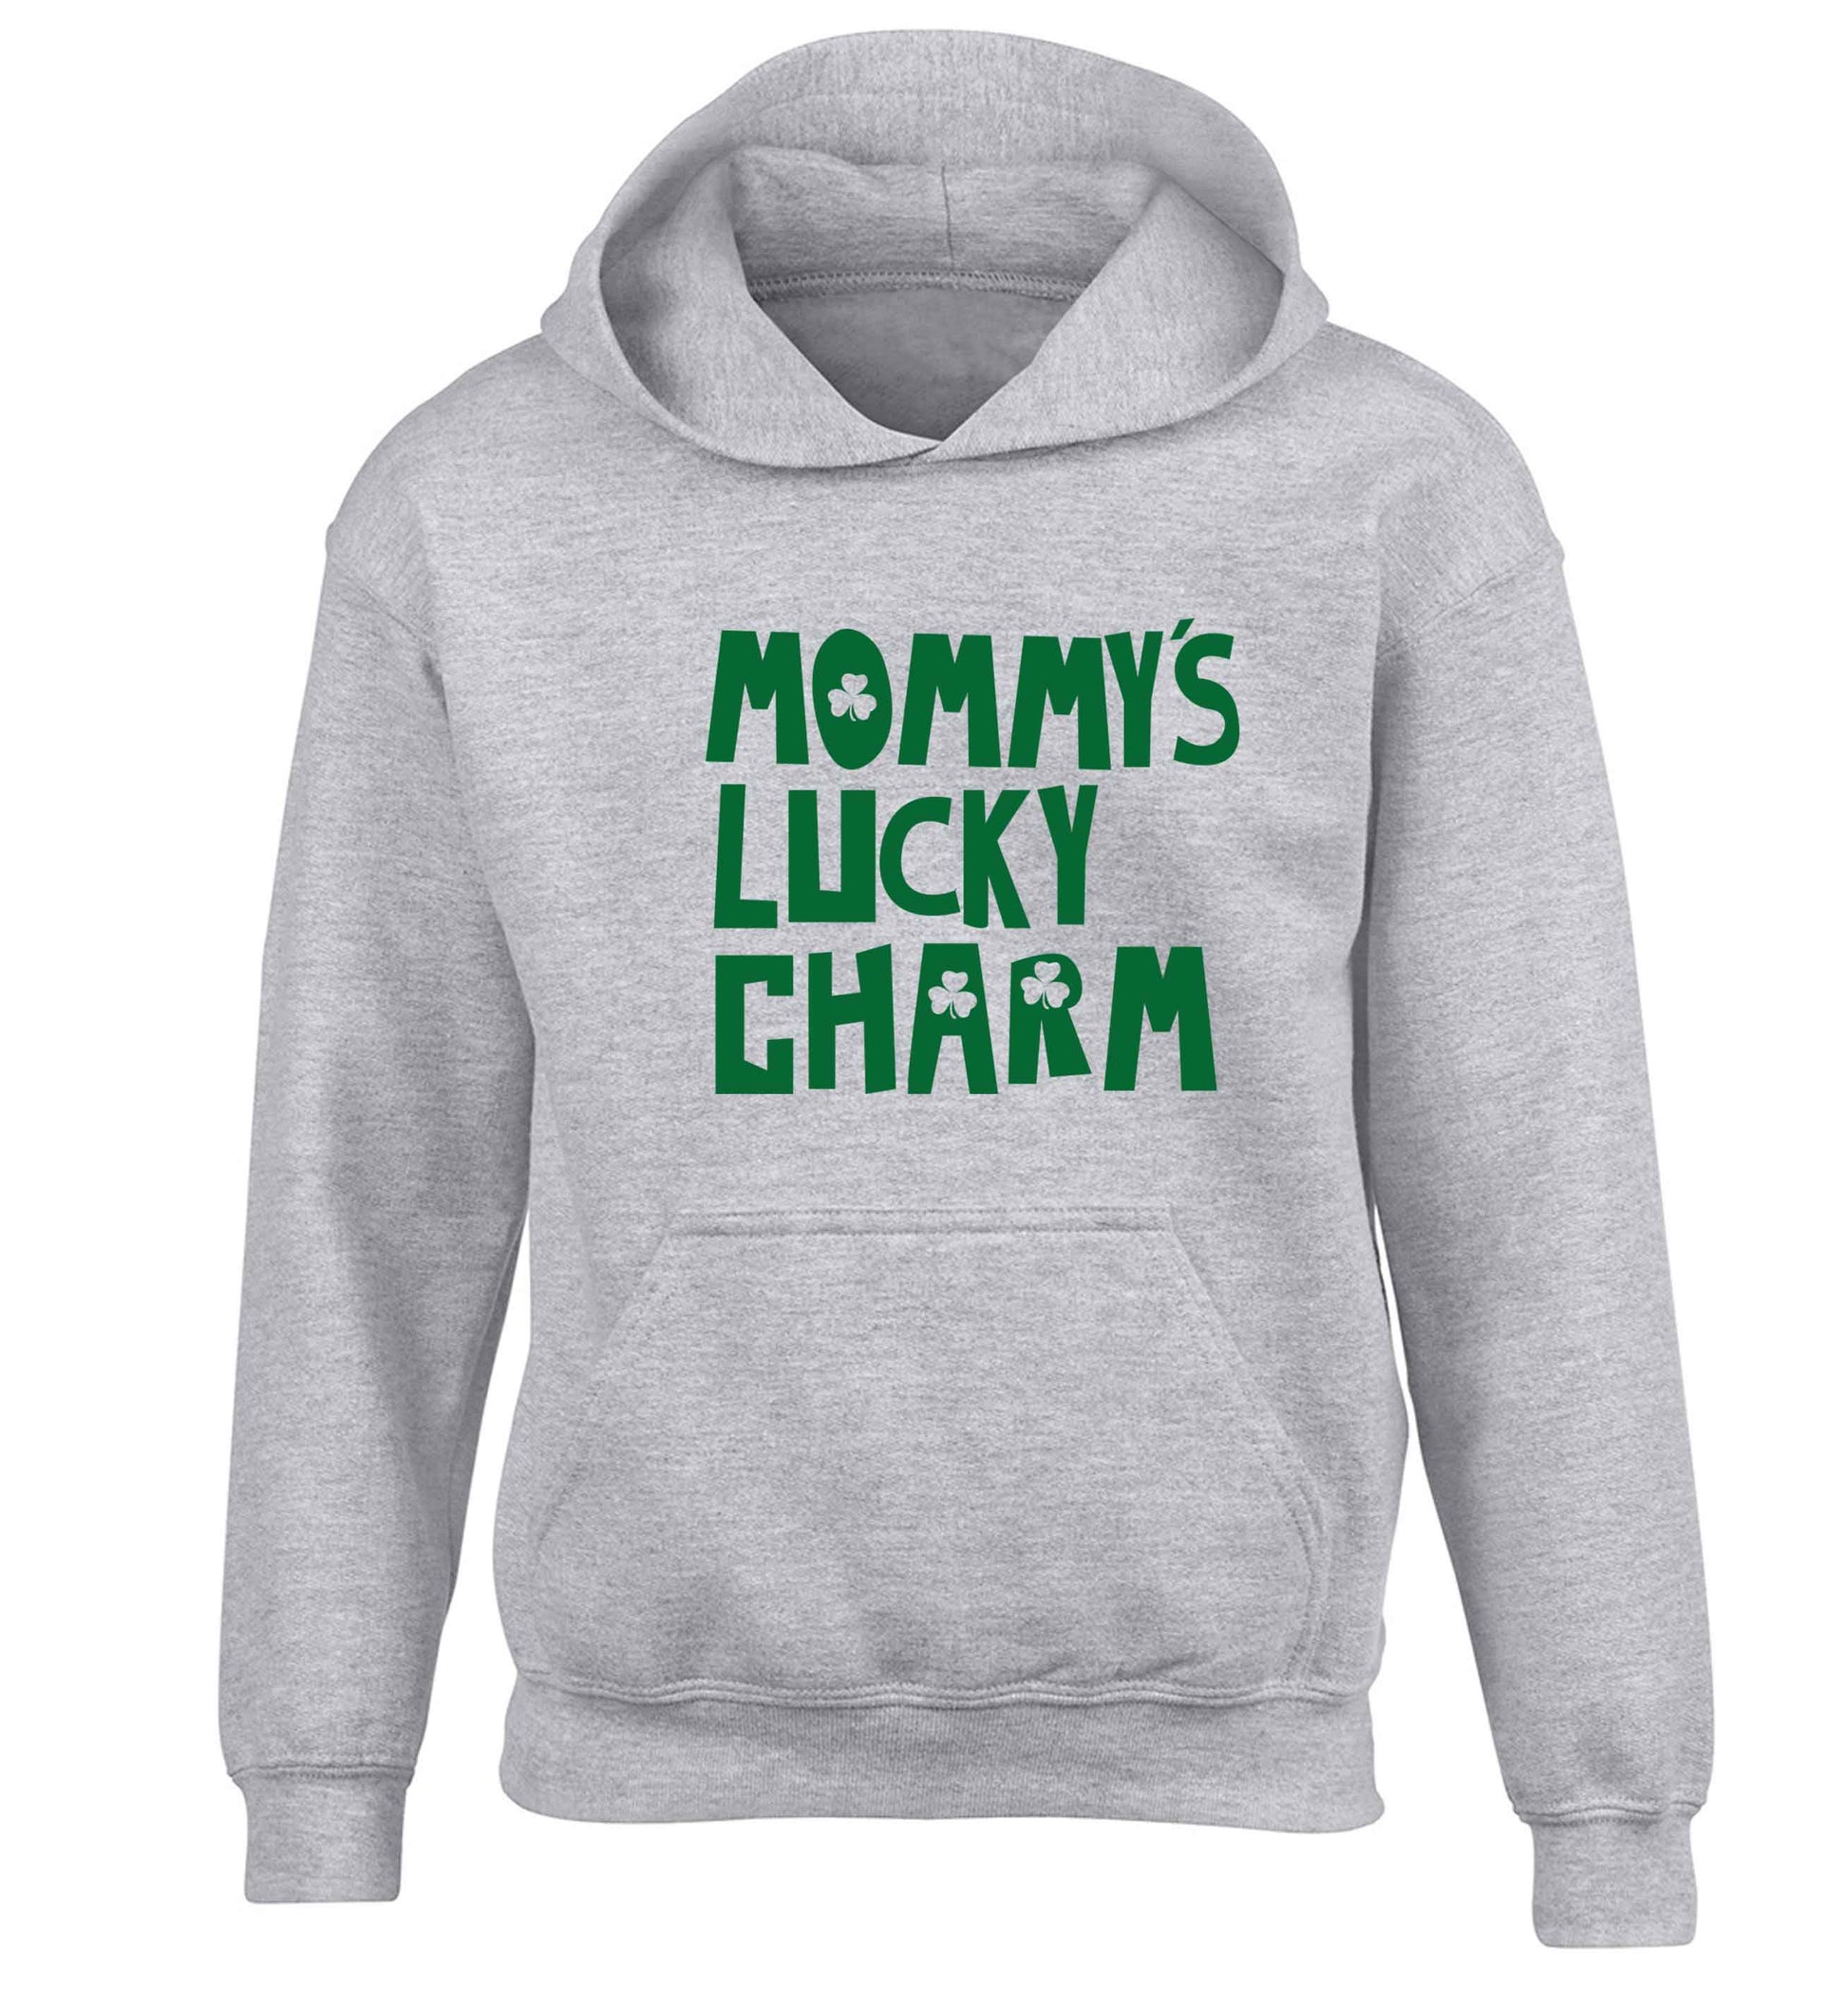 Mommy's lucky charm children's grey hoodie 12-13 Years